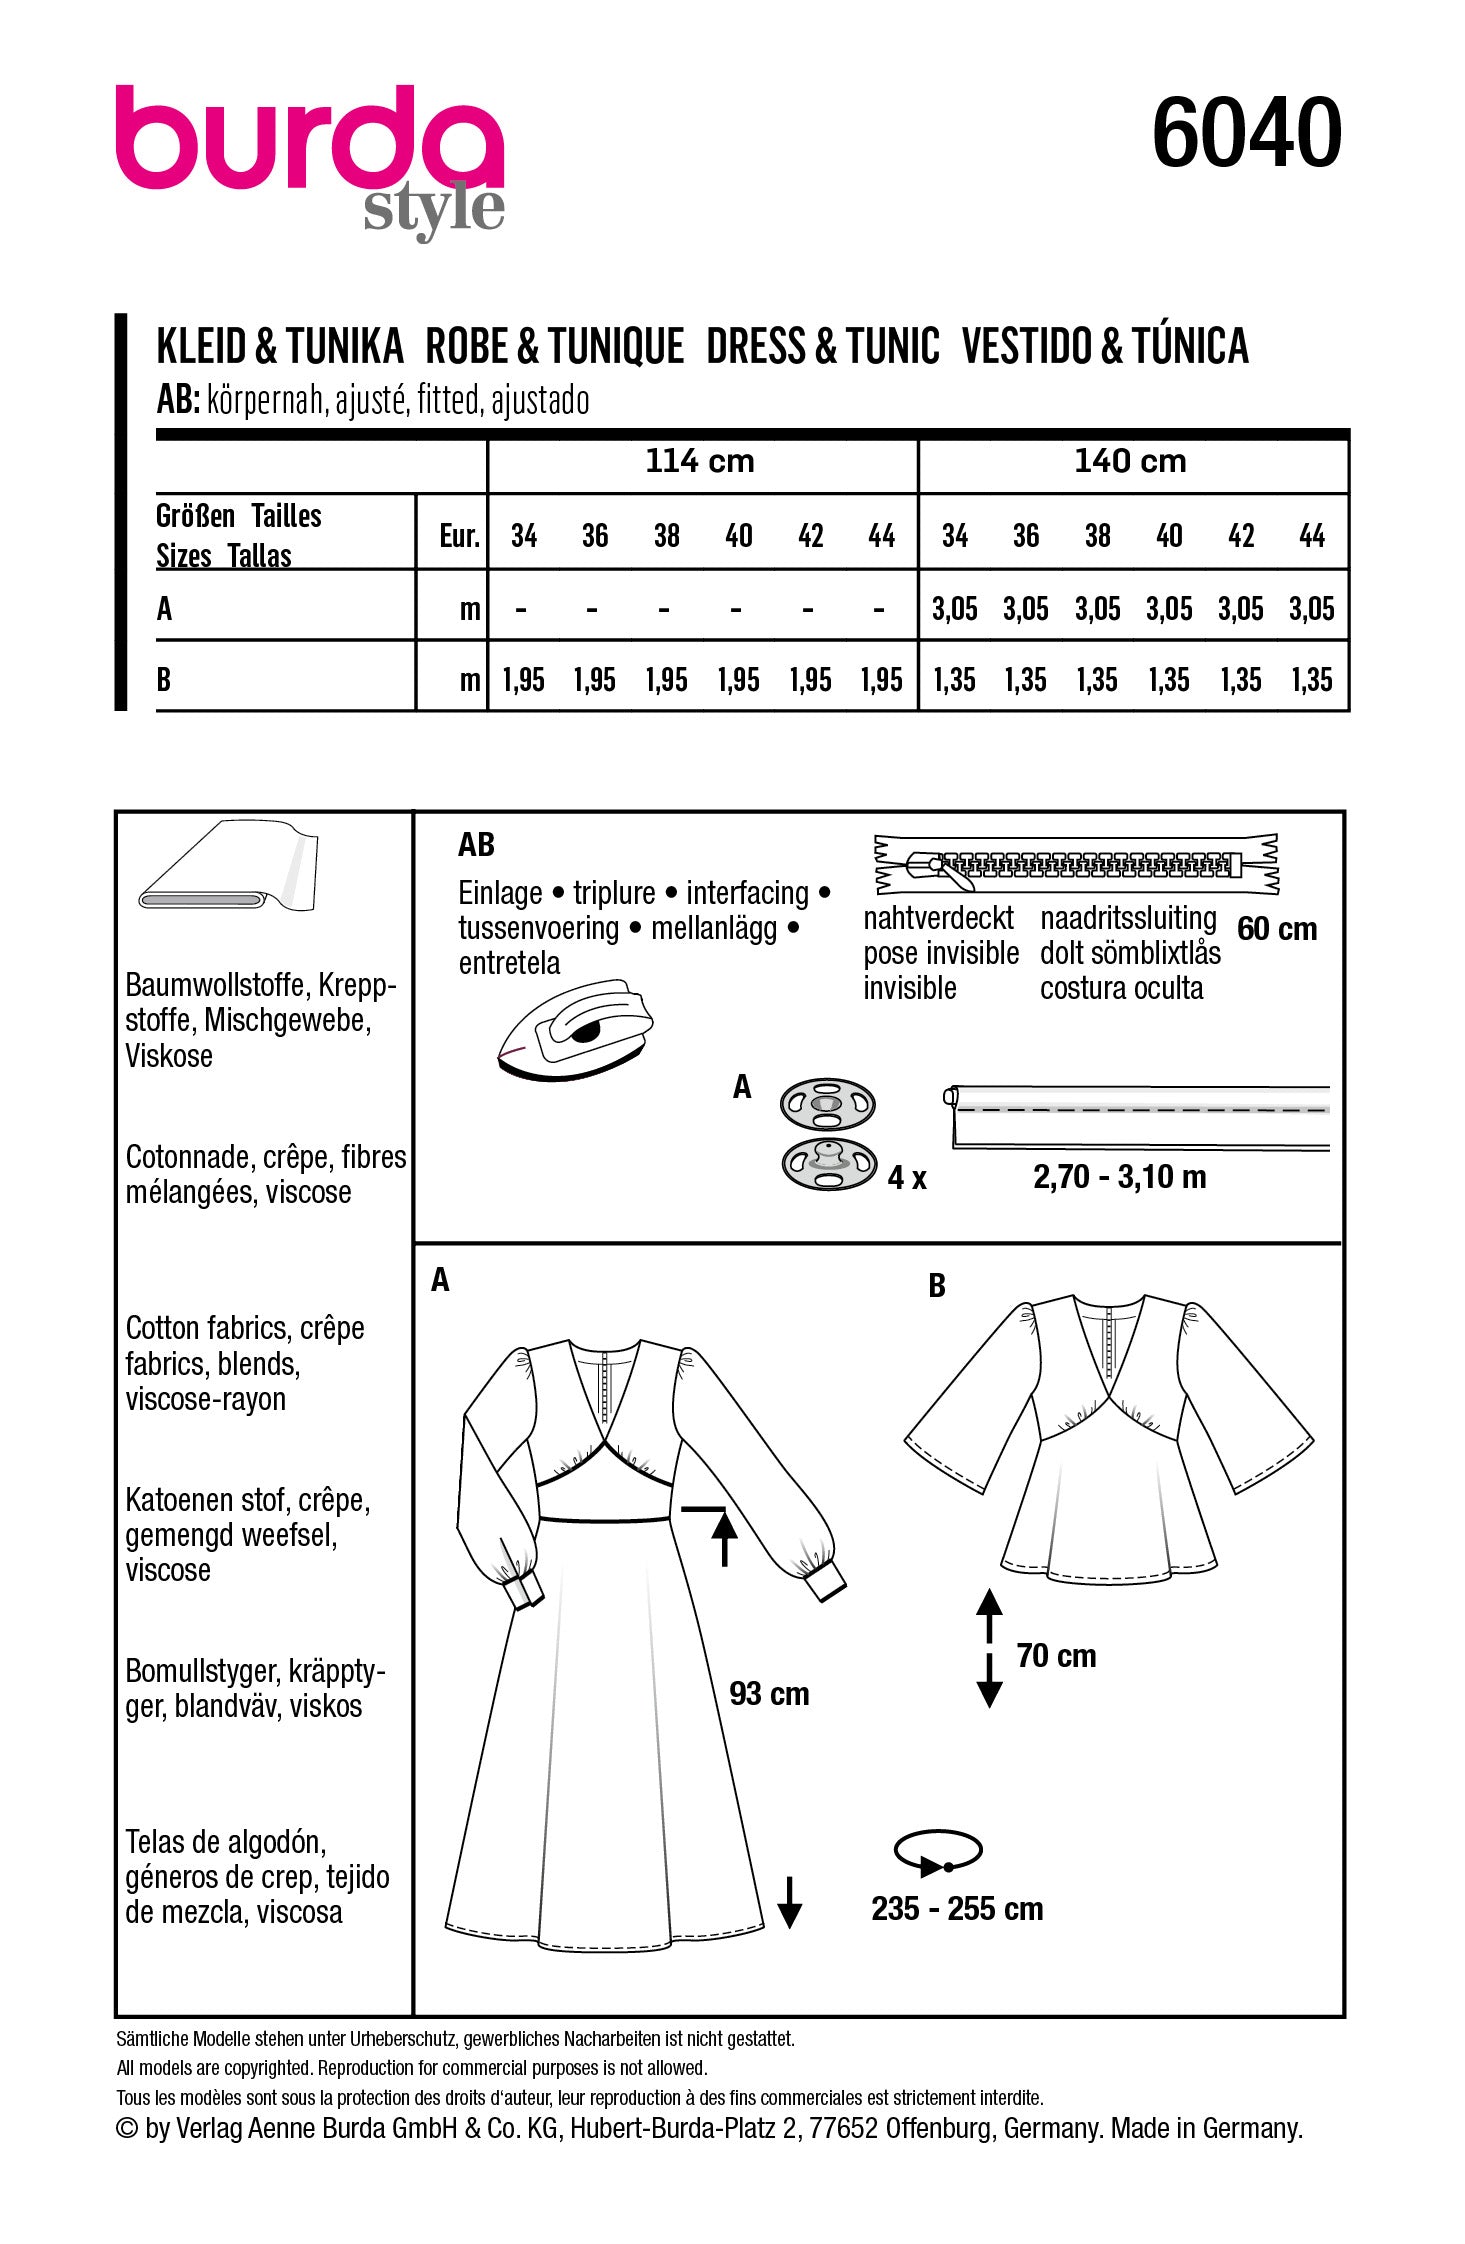 Burda Style Pattern 6040 Ladies Outerwear Dress / Blouse from Jaycotts Sewing Supplies